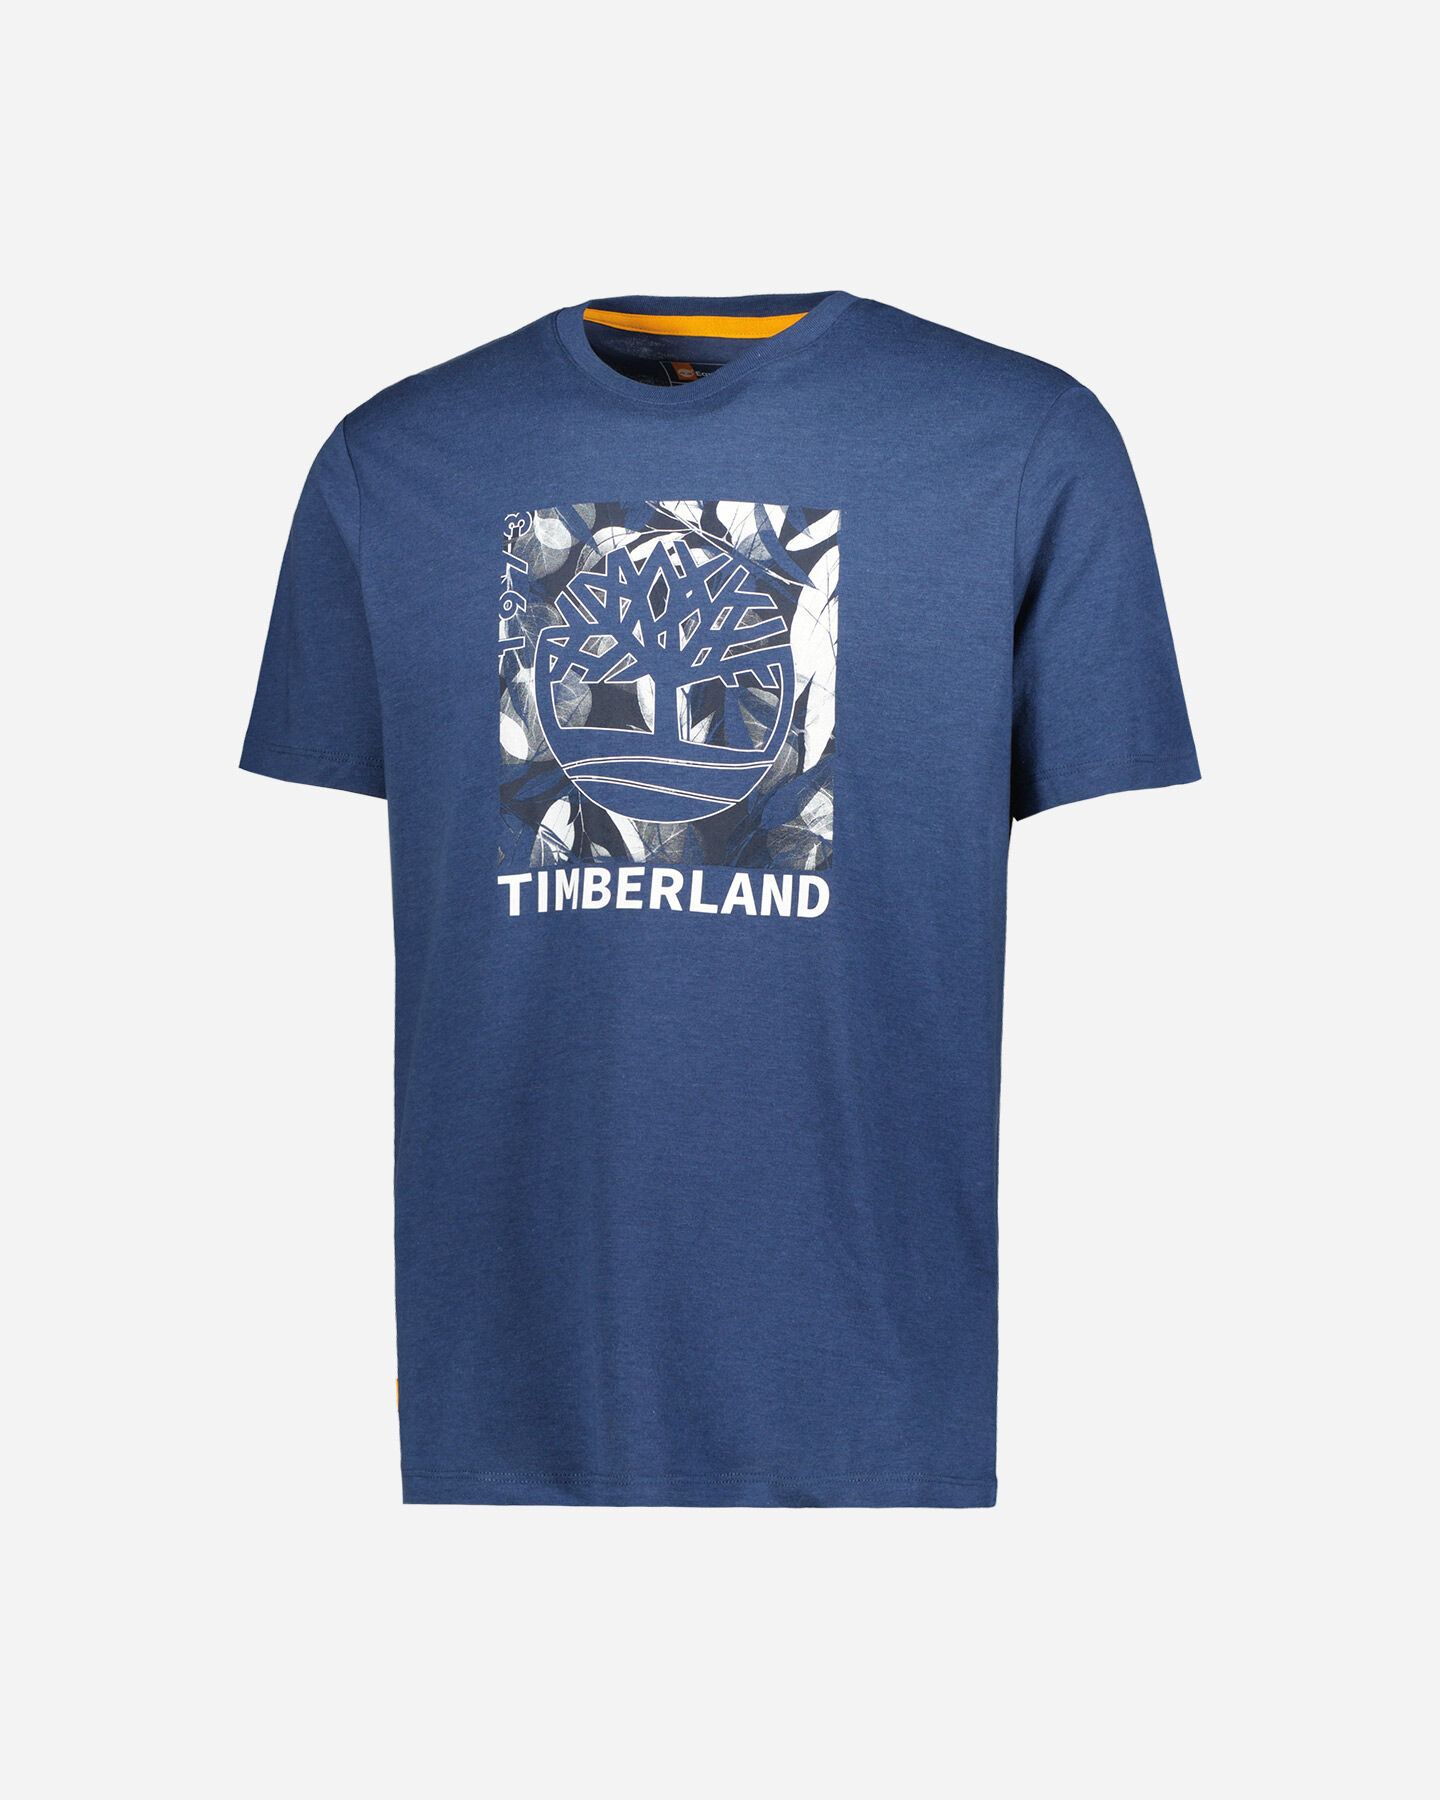  T-Shirt TIMBERLAND SUMMER M S4104767|2881|S scatto 0